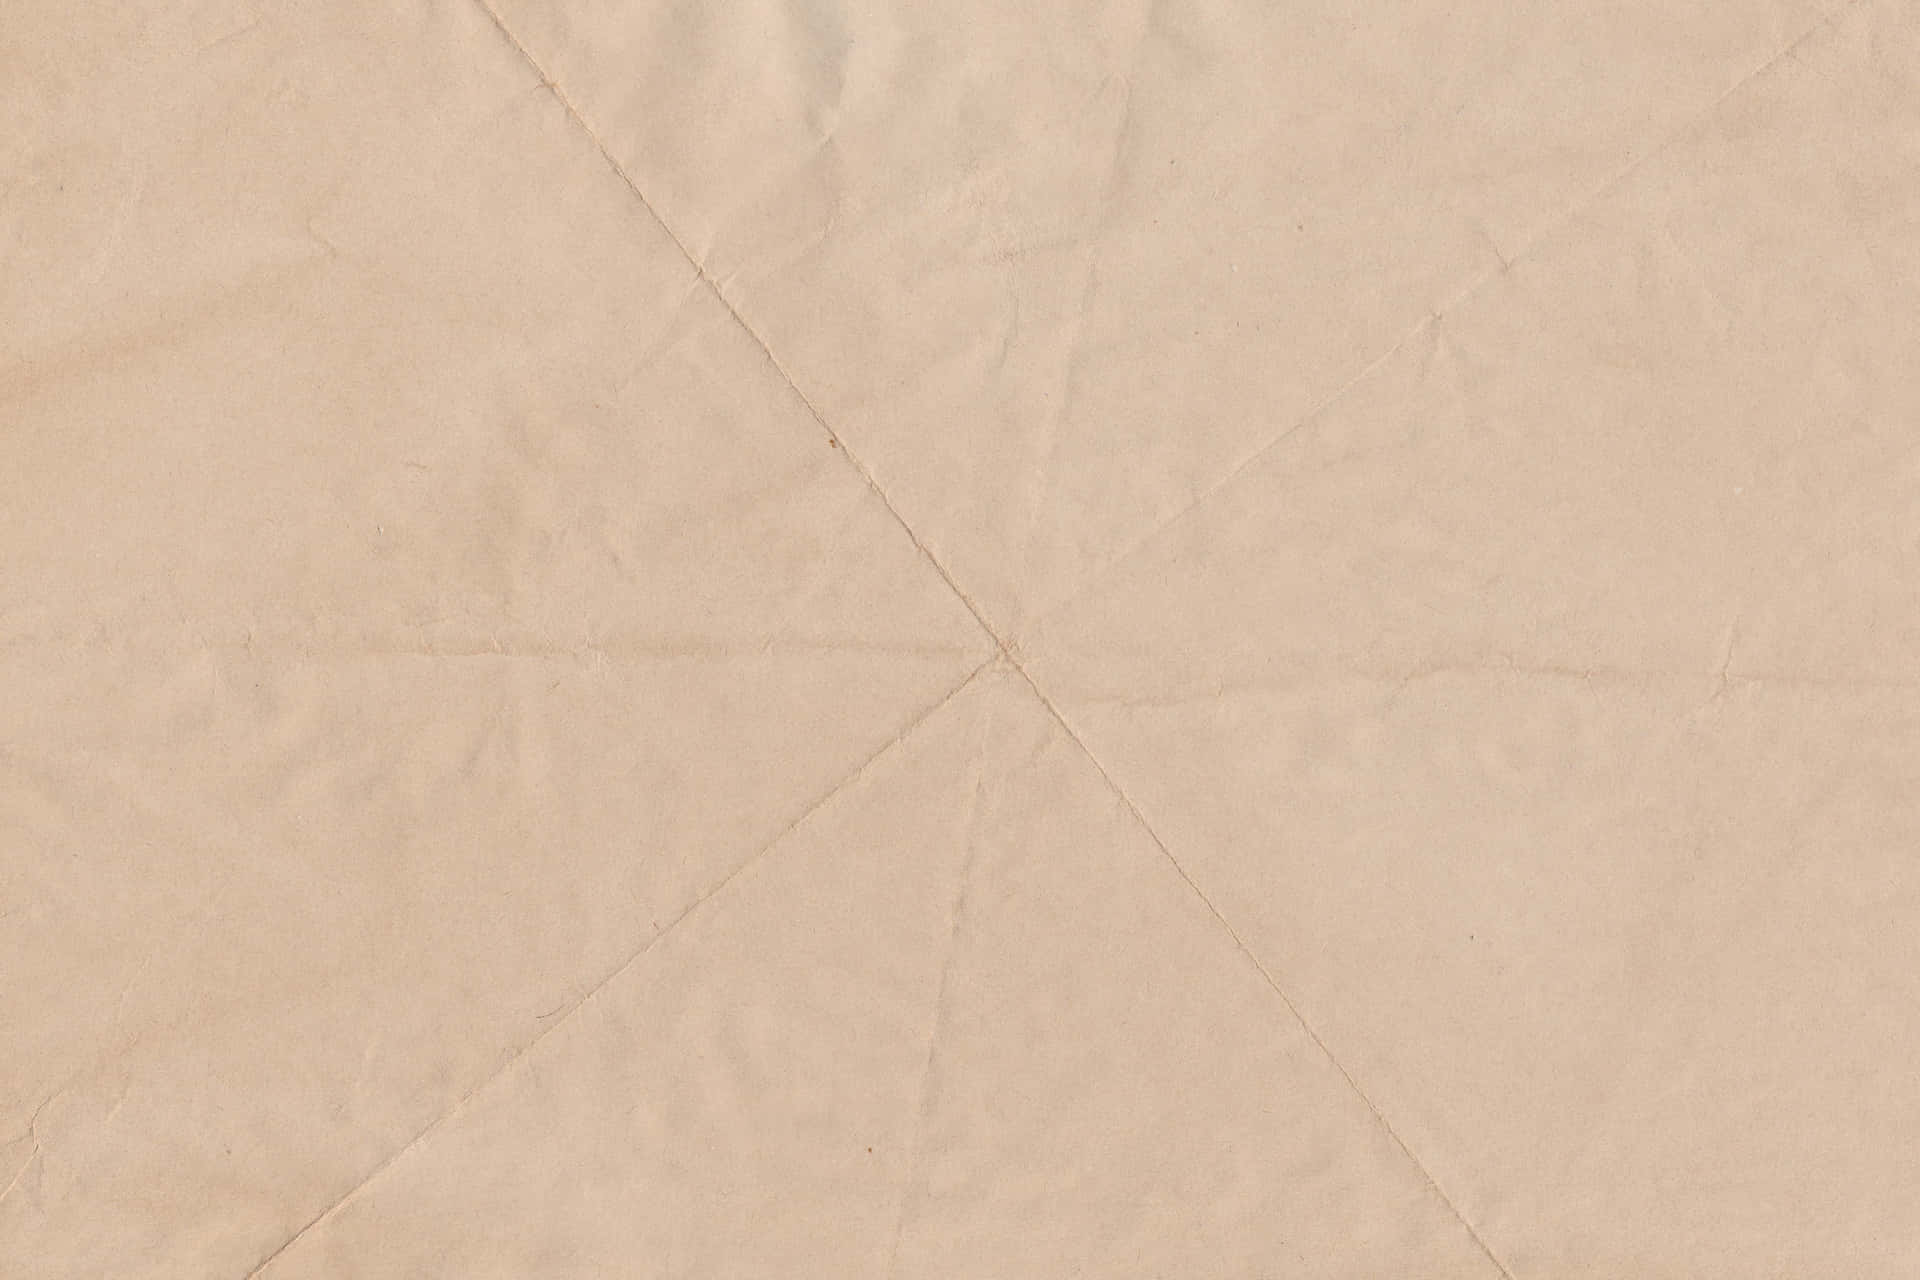 Caption: High-Quality Brown Paper Texture Wallpaper